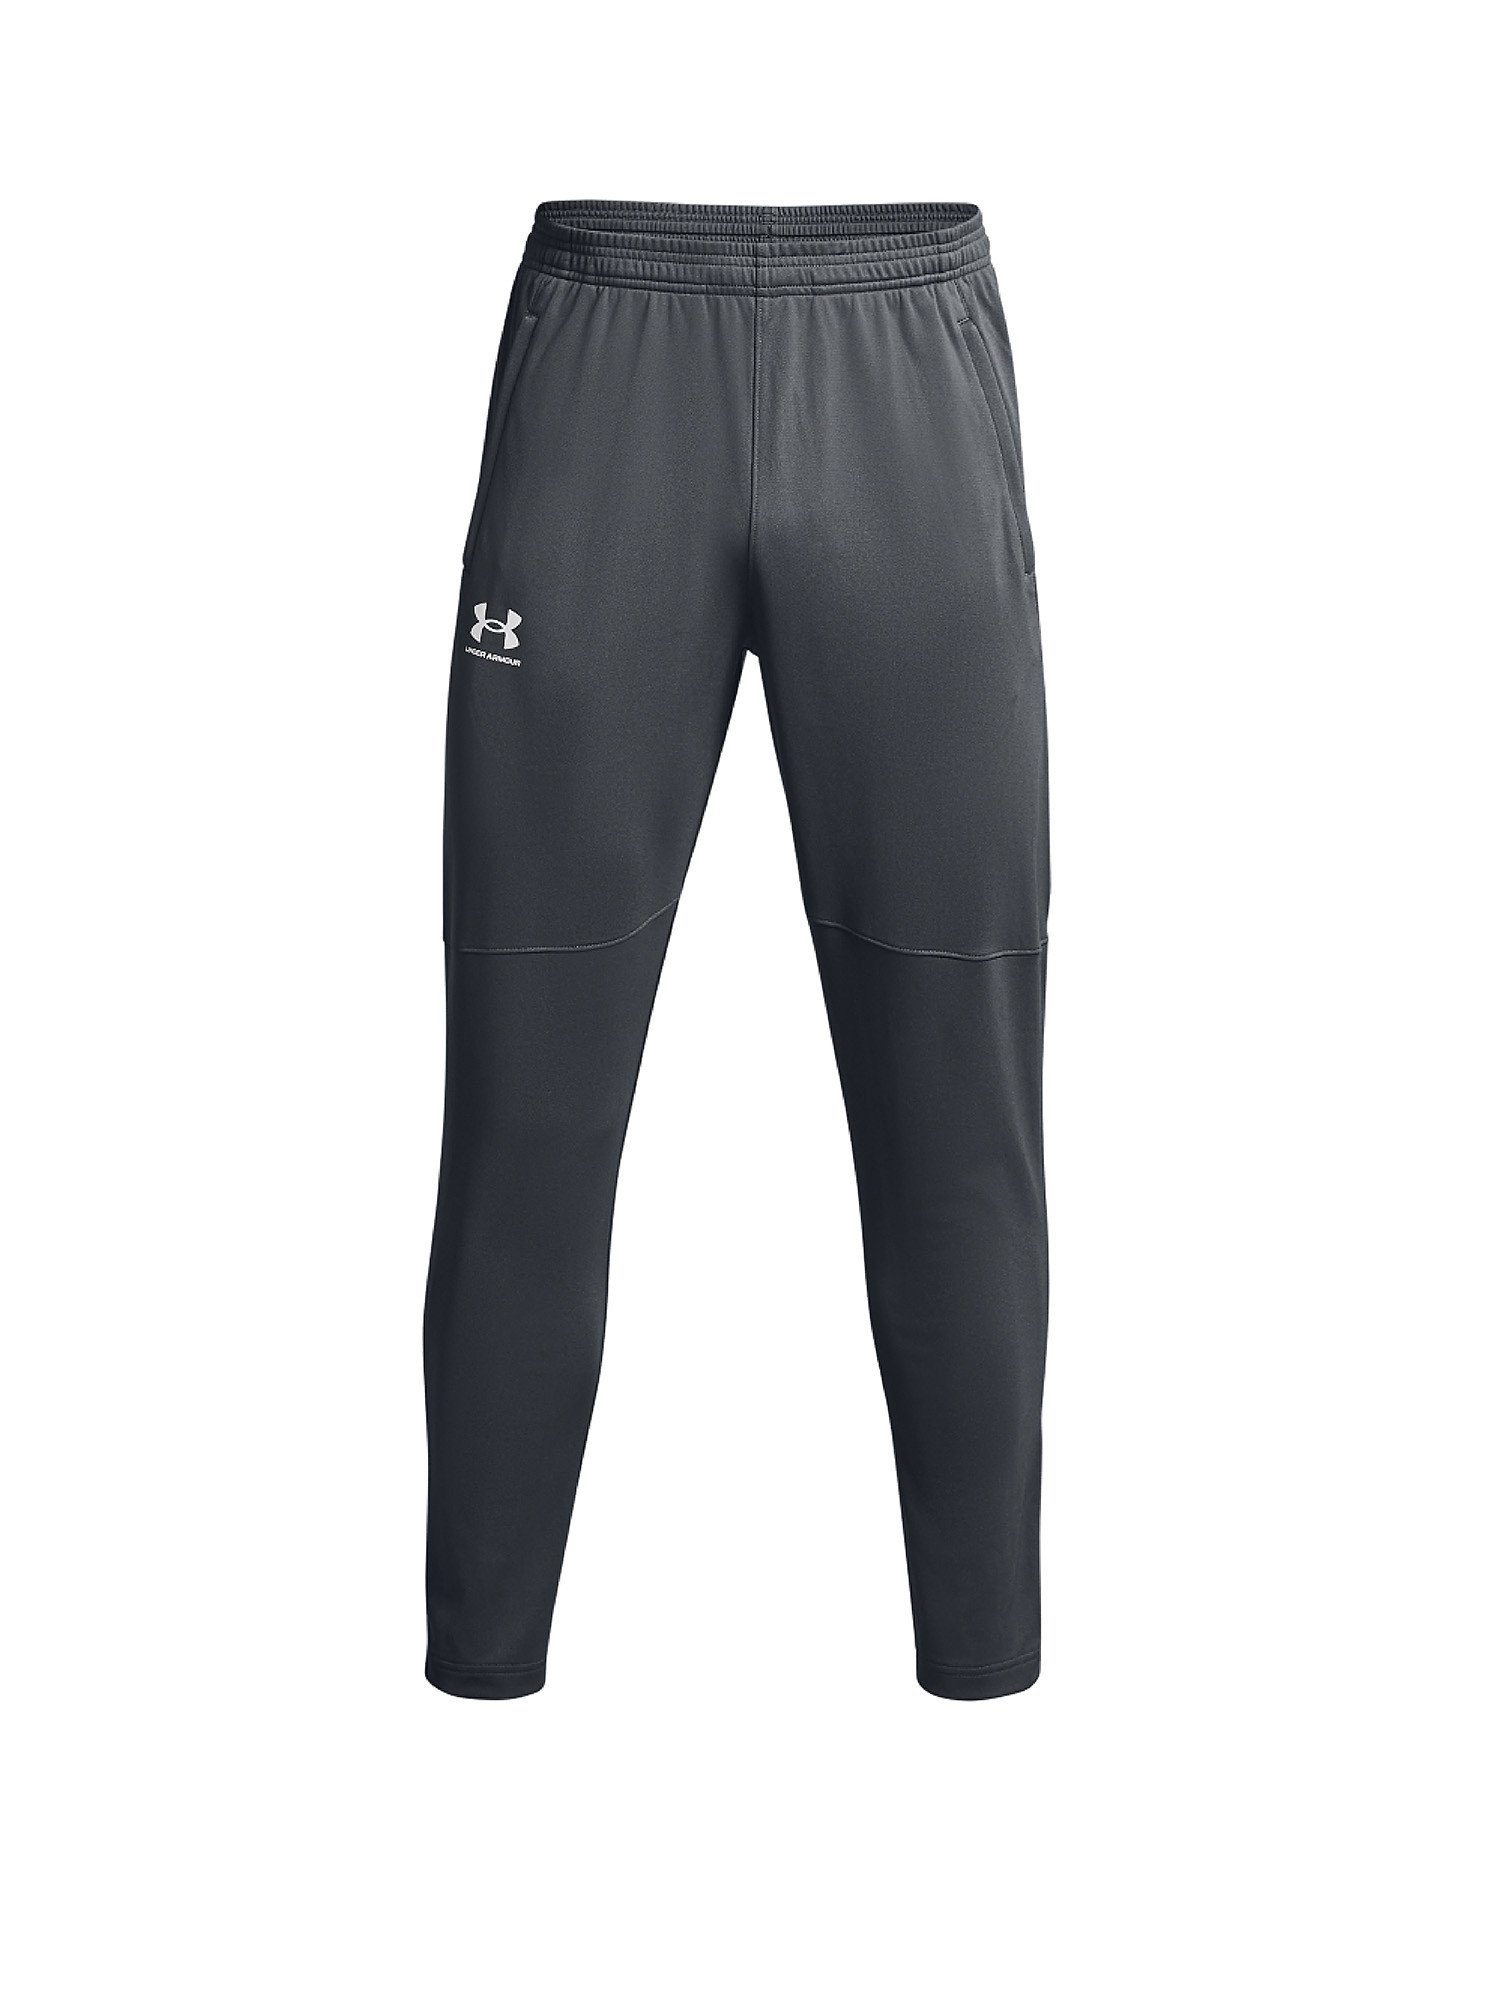 Under Armour - UA Pique Track Pants, Anthracite, large image number 0